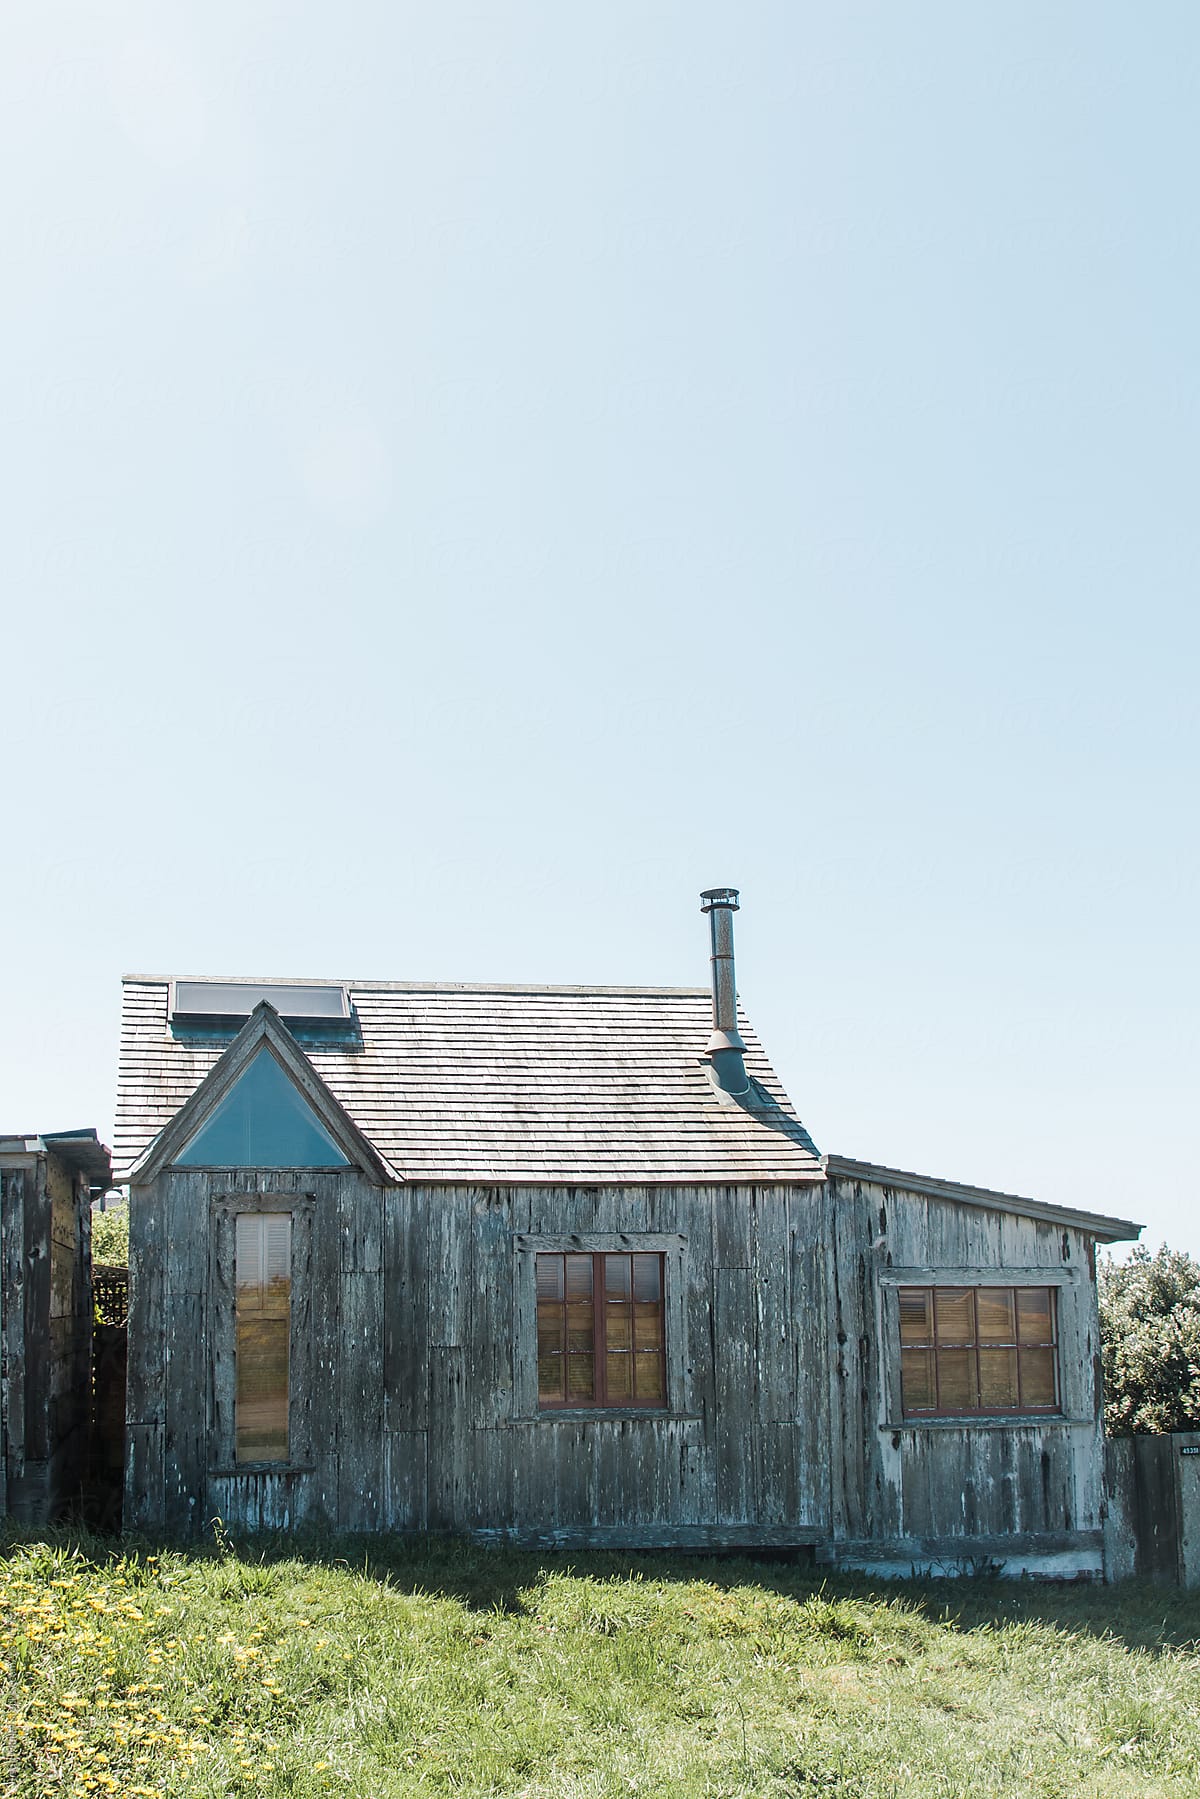 A rustic weathered house.